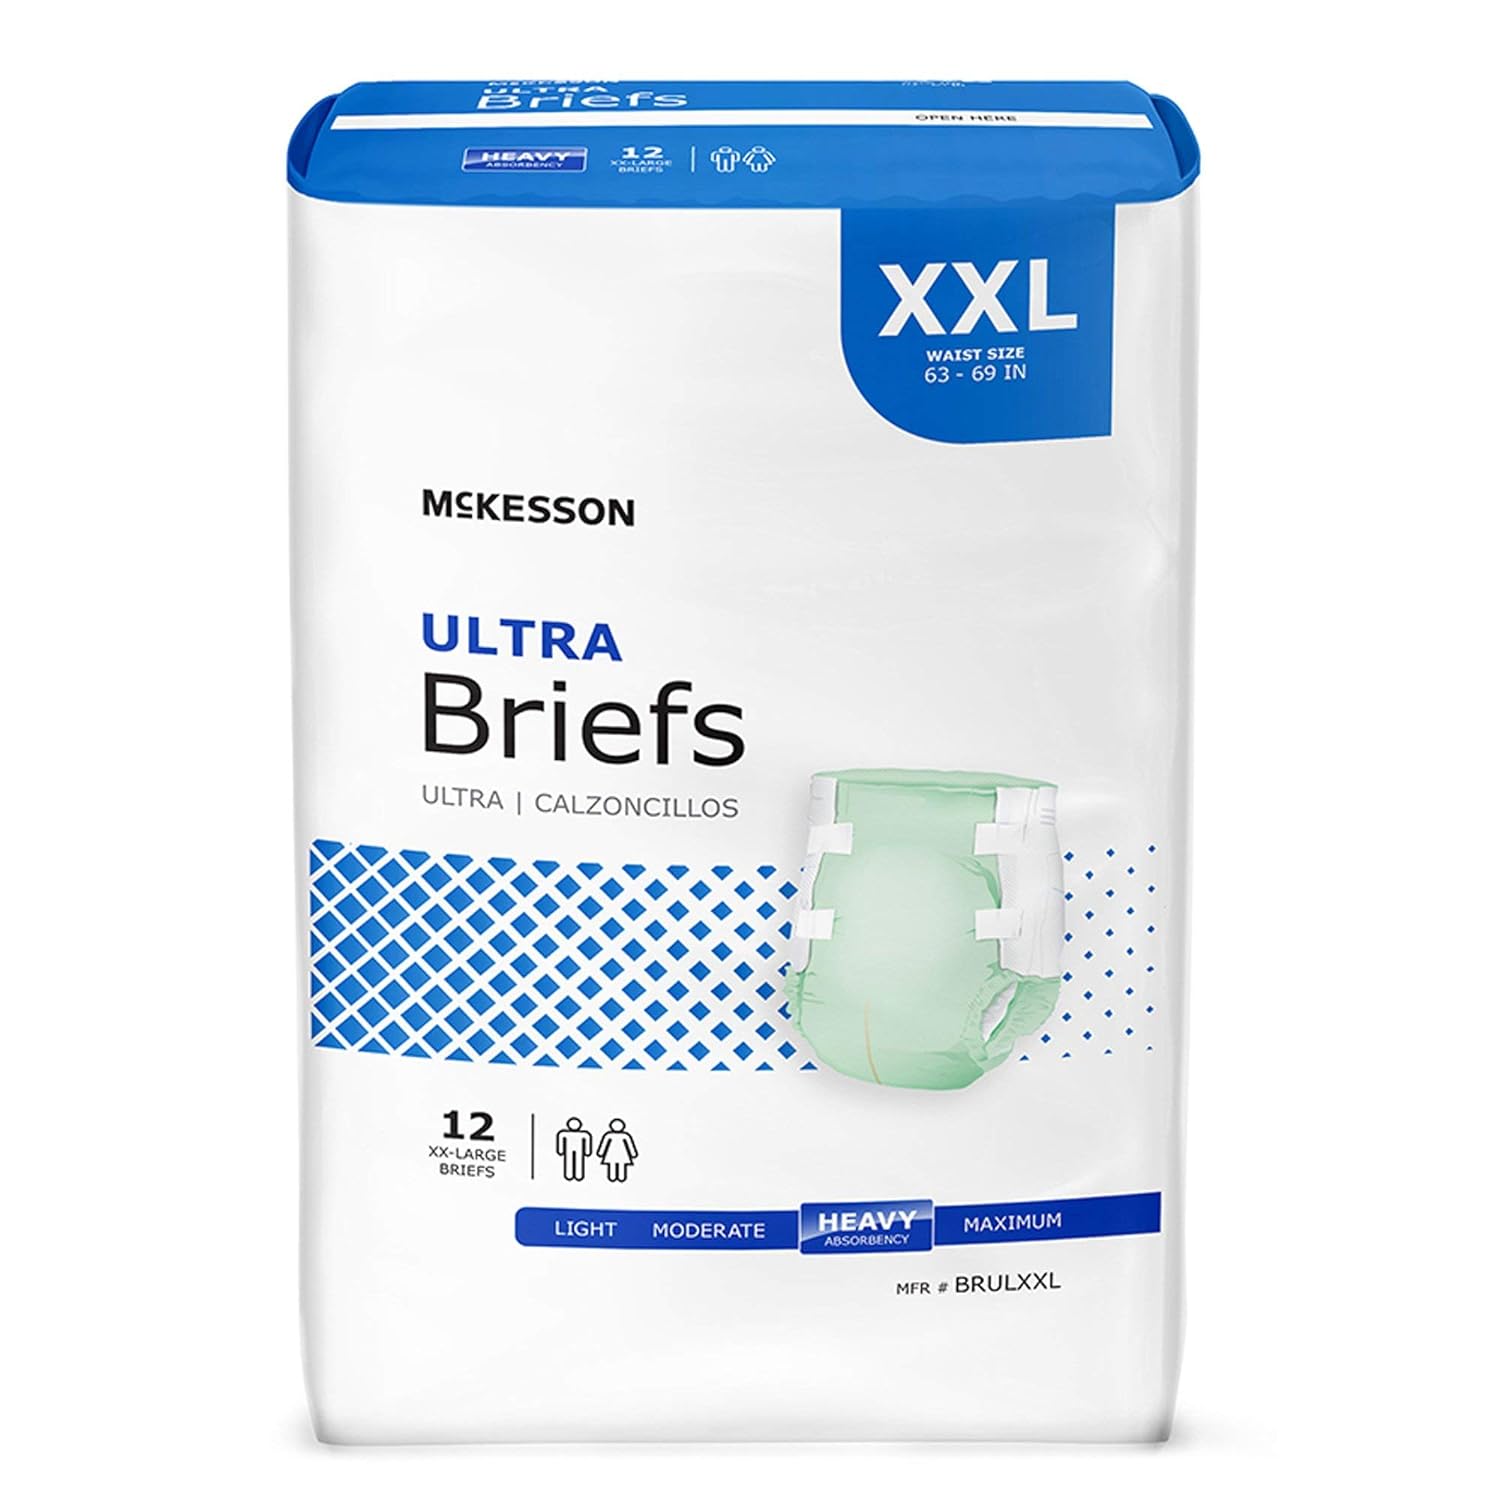 McKesson Ultra Briefs, Incontinence, Heavy Absorbency, 2XL, 12 Count, 1 Pack, 12 Total